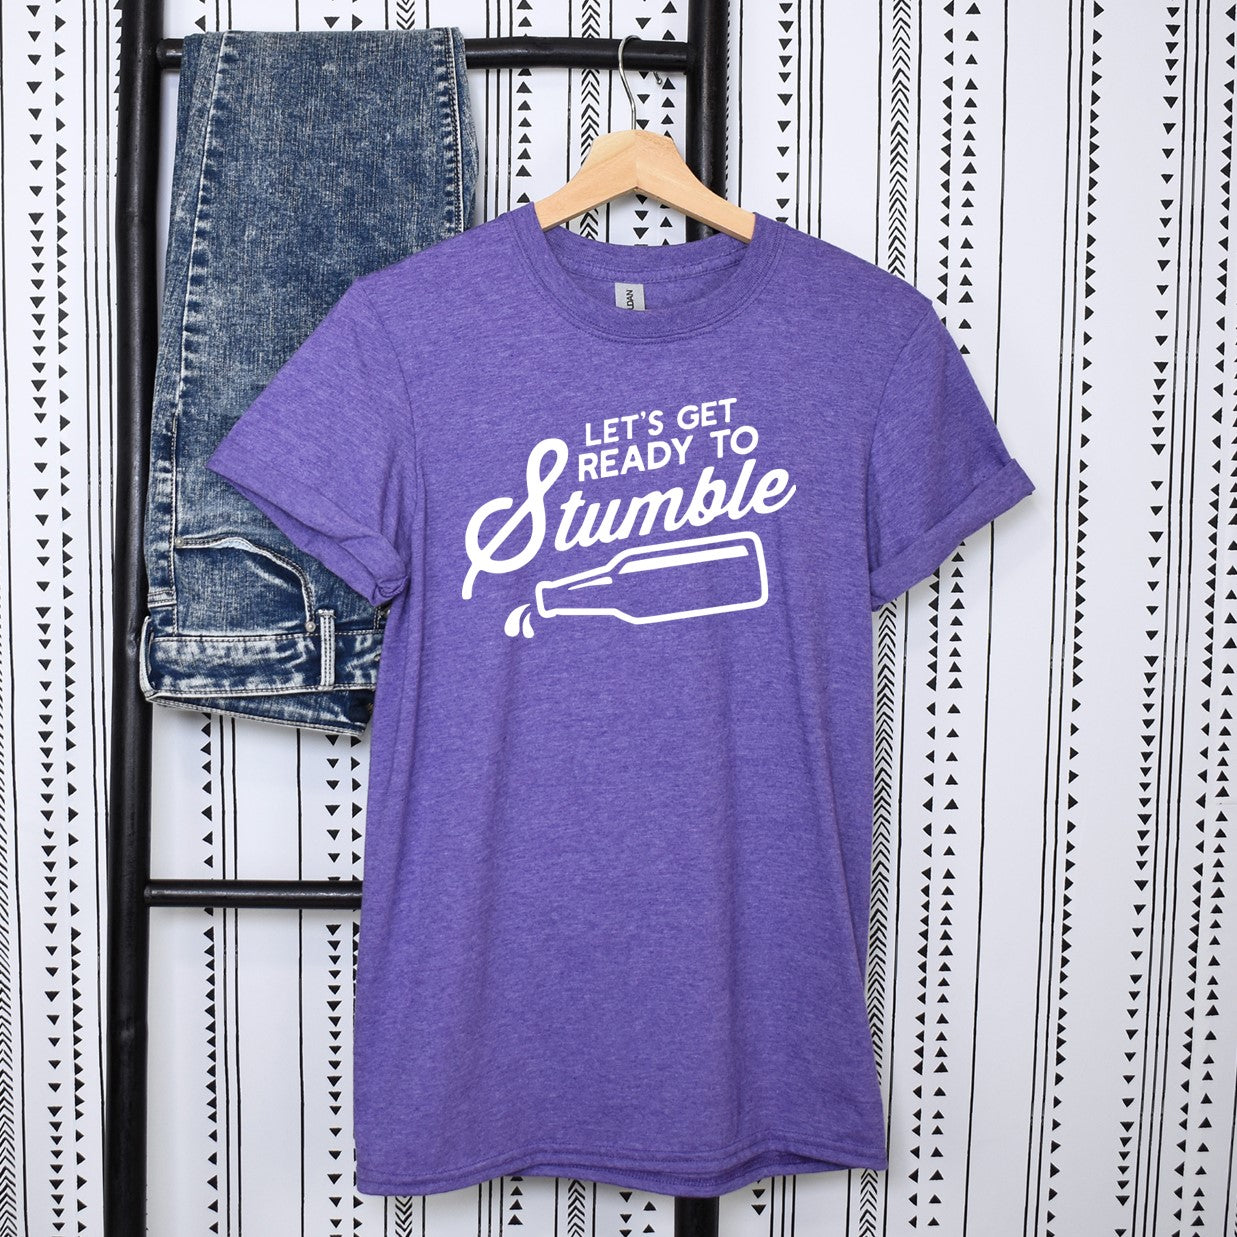 Let's get ready to STUMBLE -Funny Beer Drinking Shirt